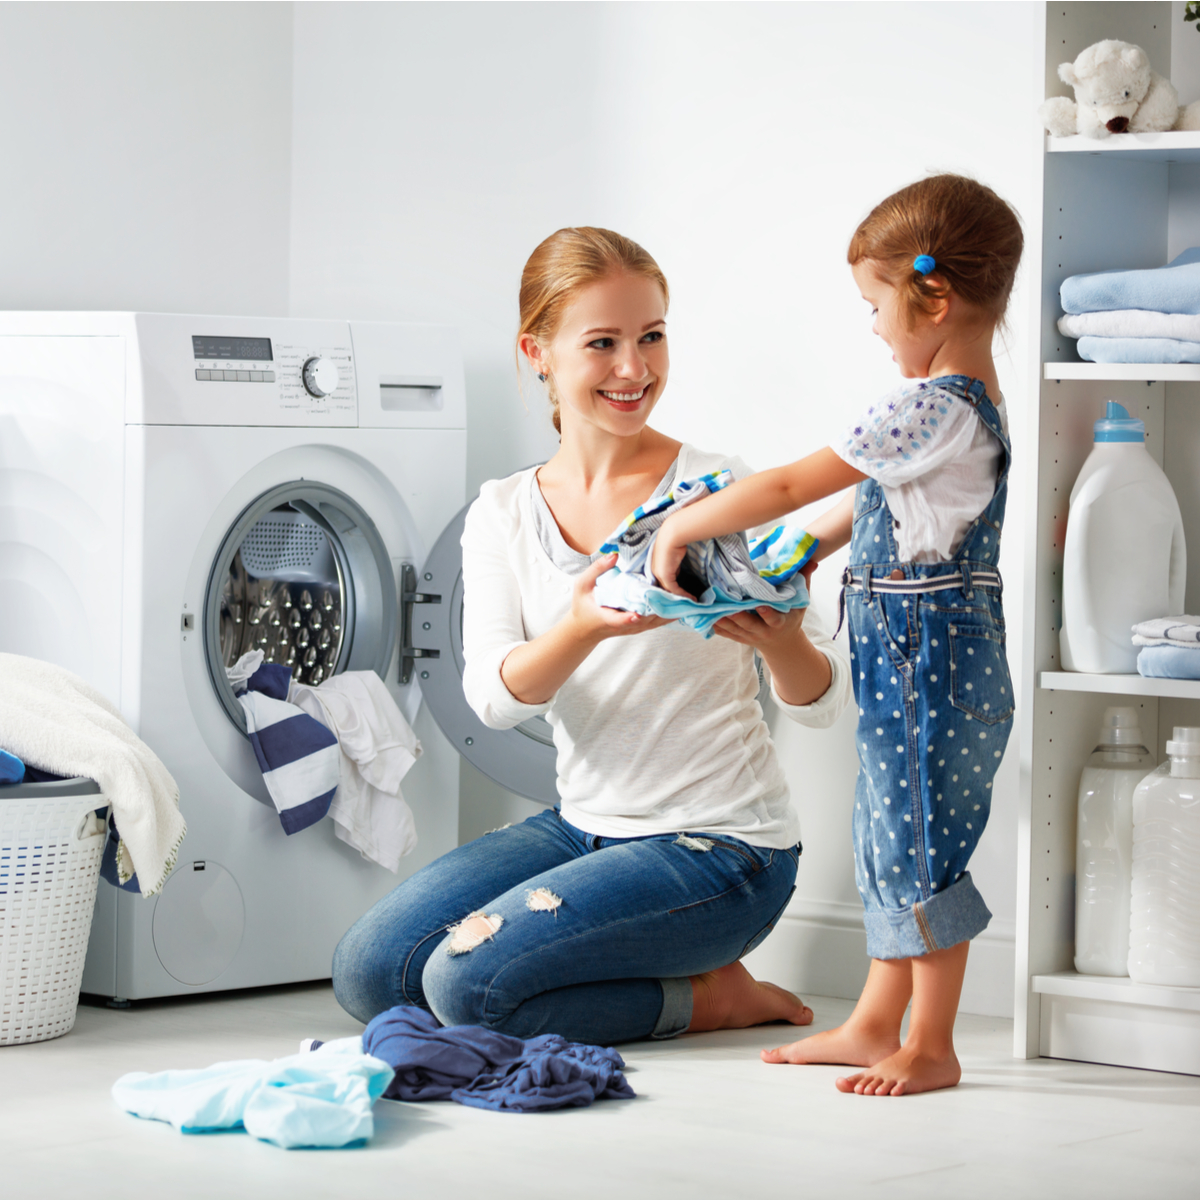 why-residential-medical-uniform-laundry-needs-to-stop-immediately